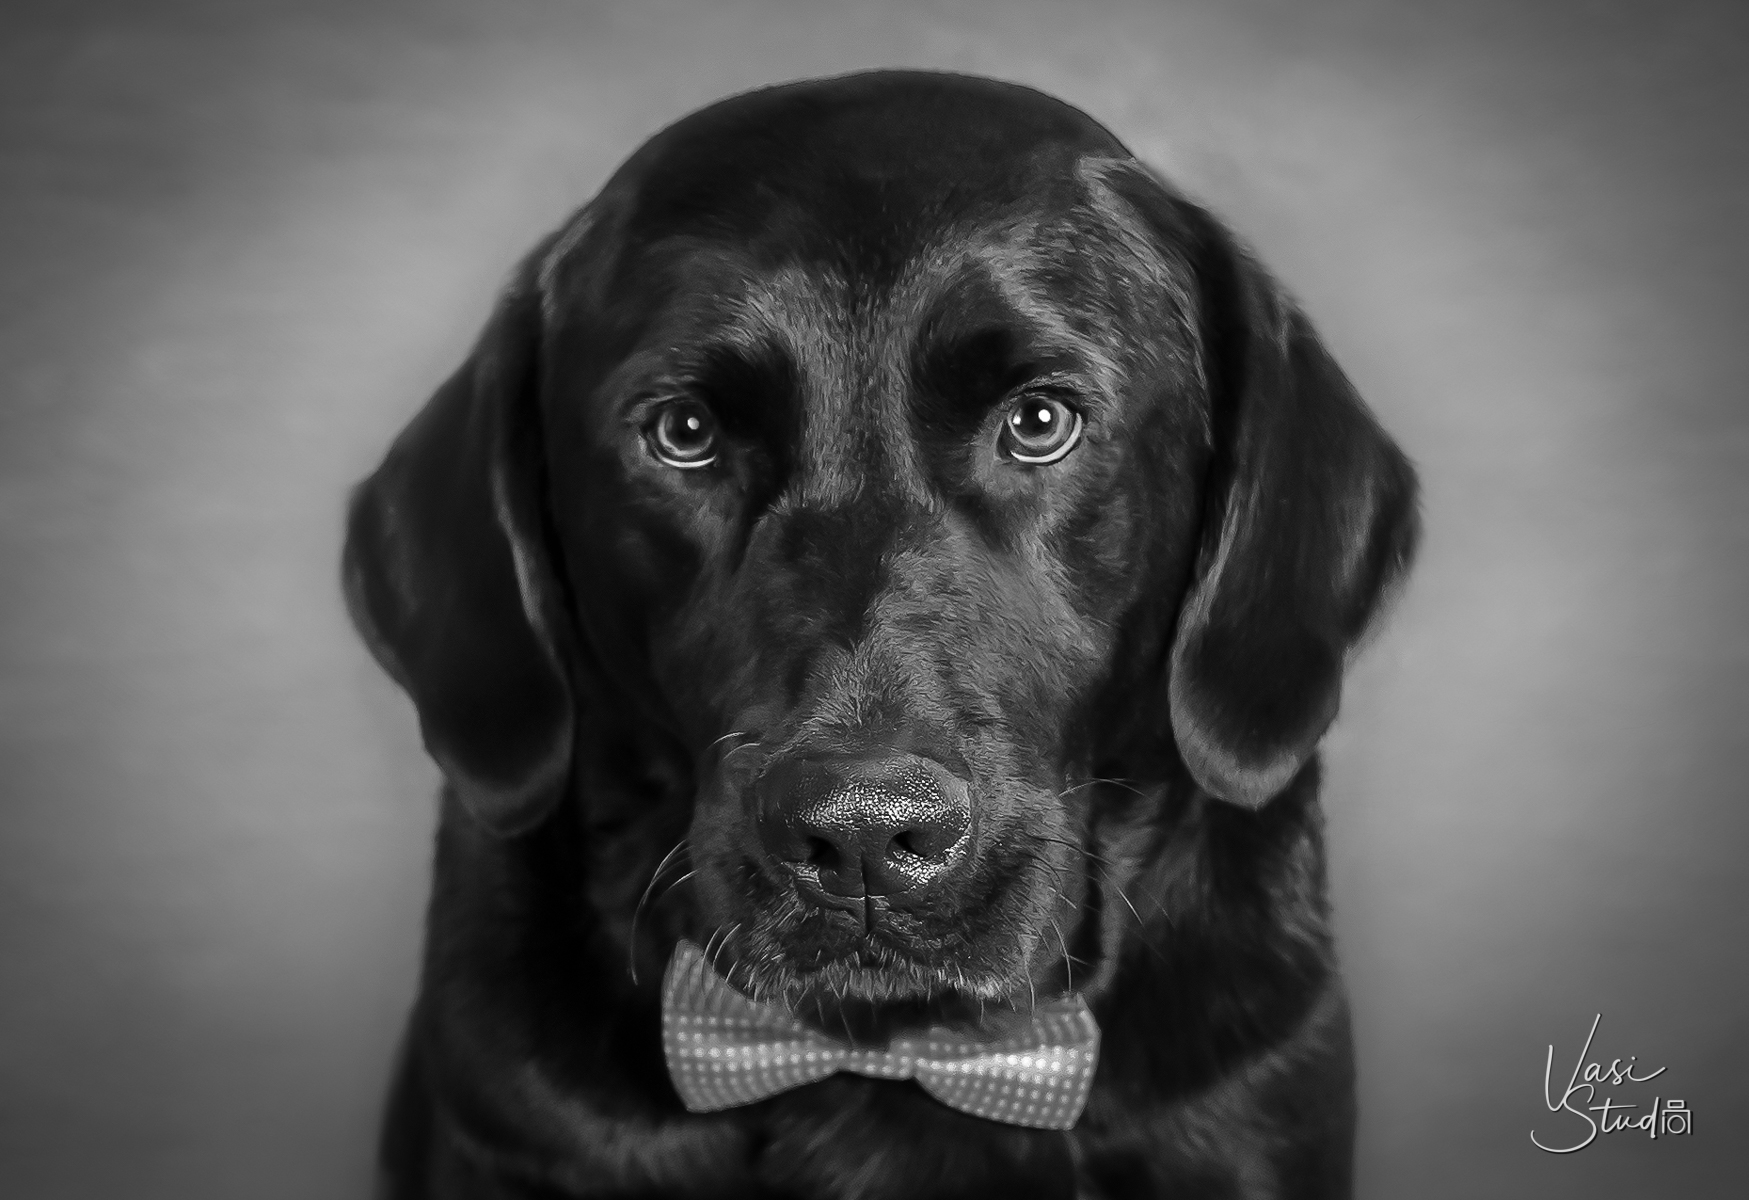 Our portraits capture the unique personalities of your dogs and cats.